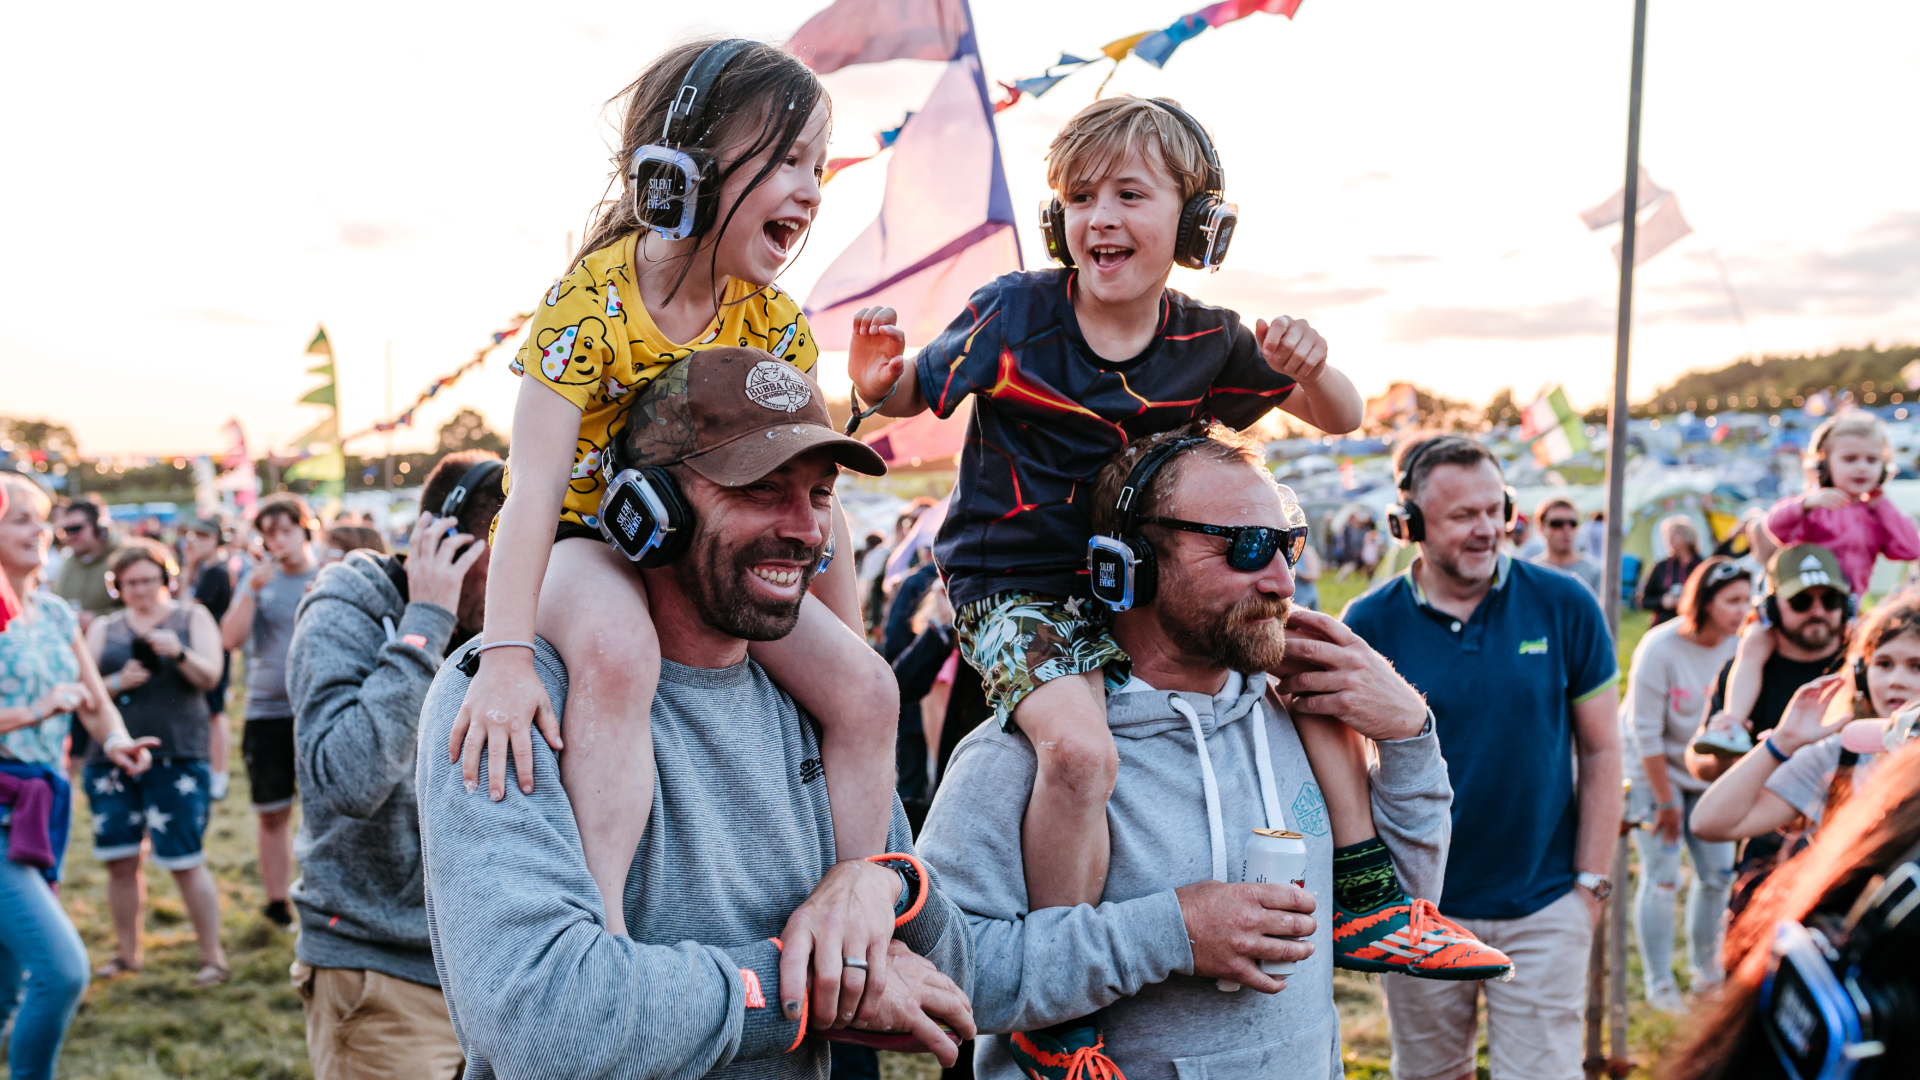 Children sat on adults' shoulders with headphones on at CarFest.jpg